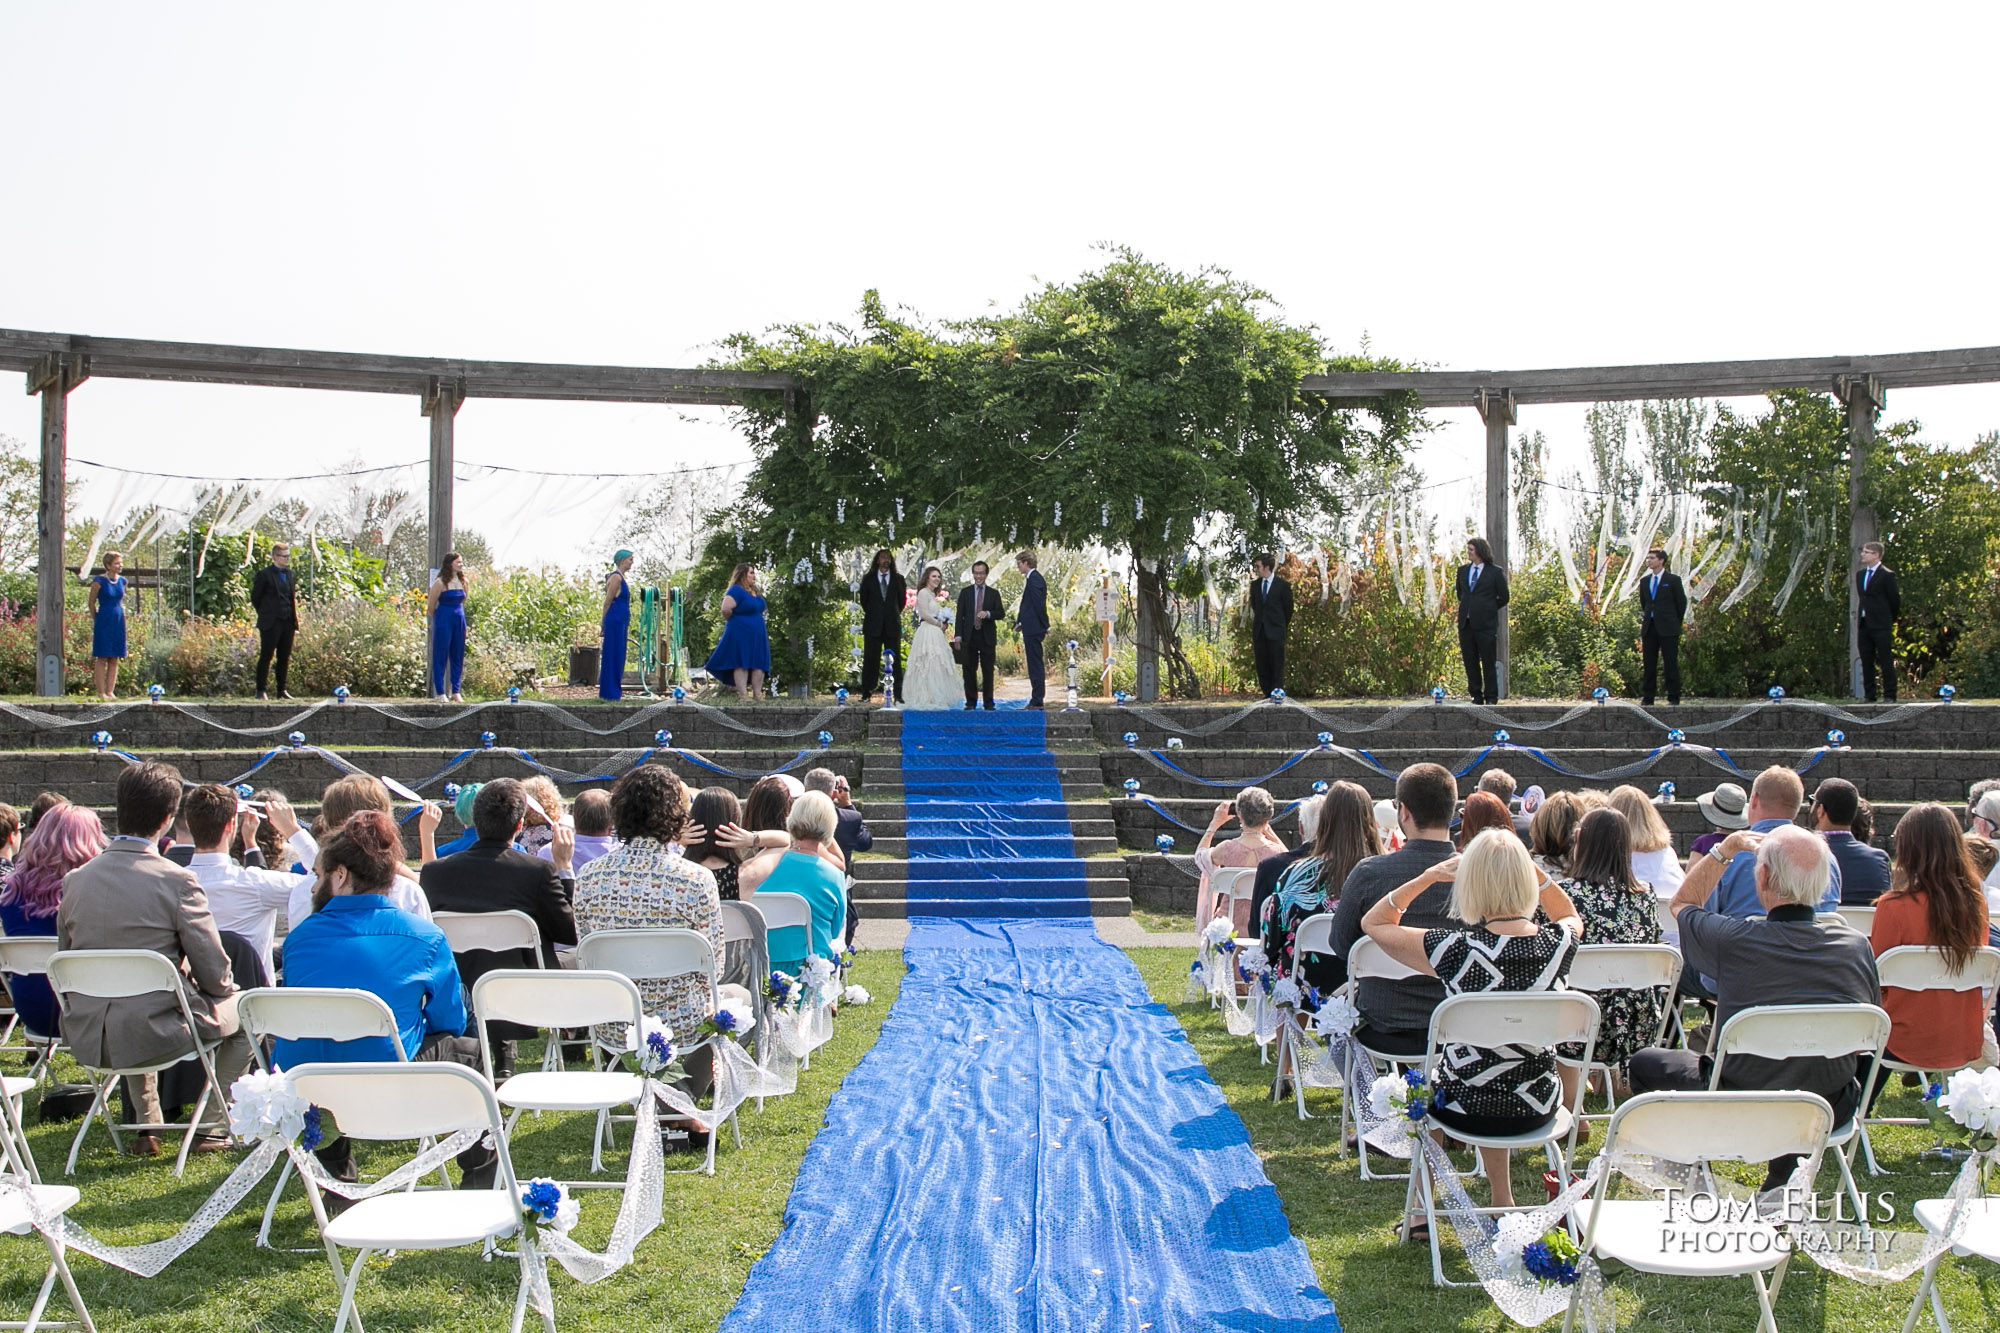 Outdoor wedding ceremony of Amber and Peter at the Amphitheater at Magnuson Park in Seattle